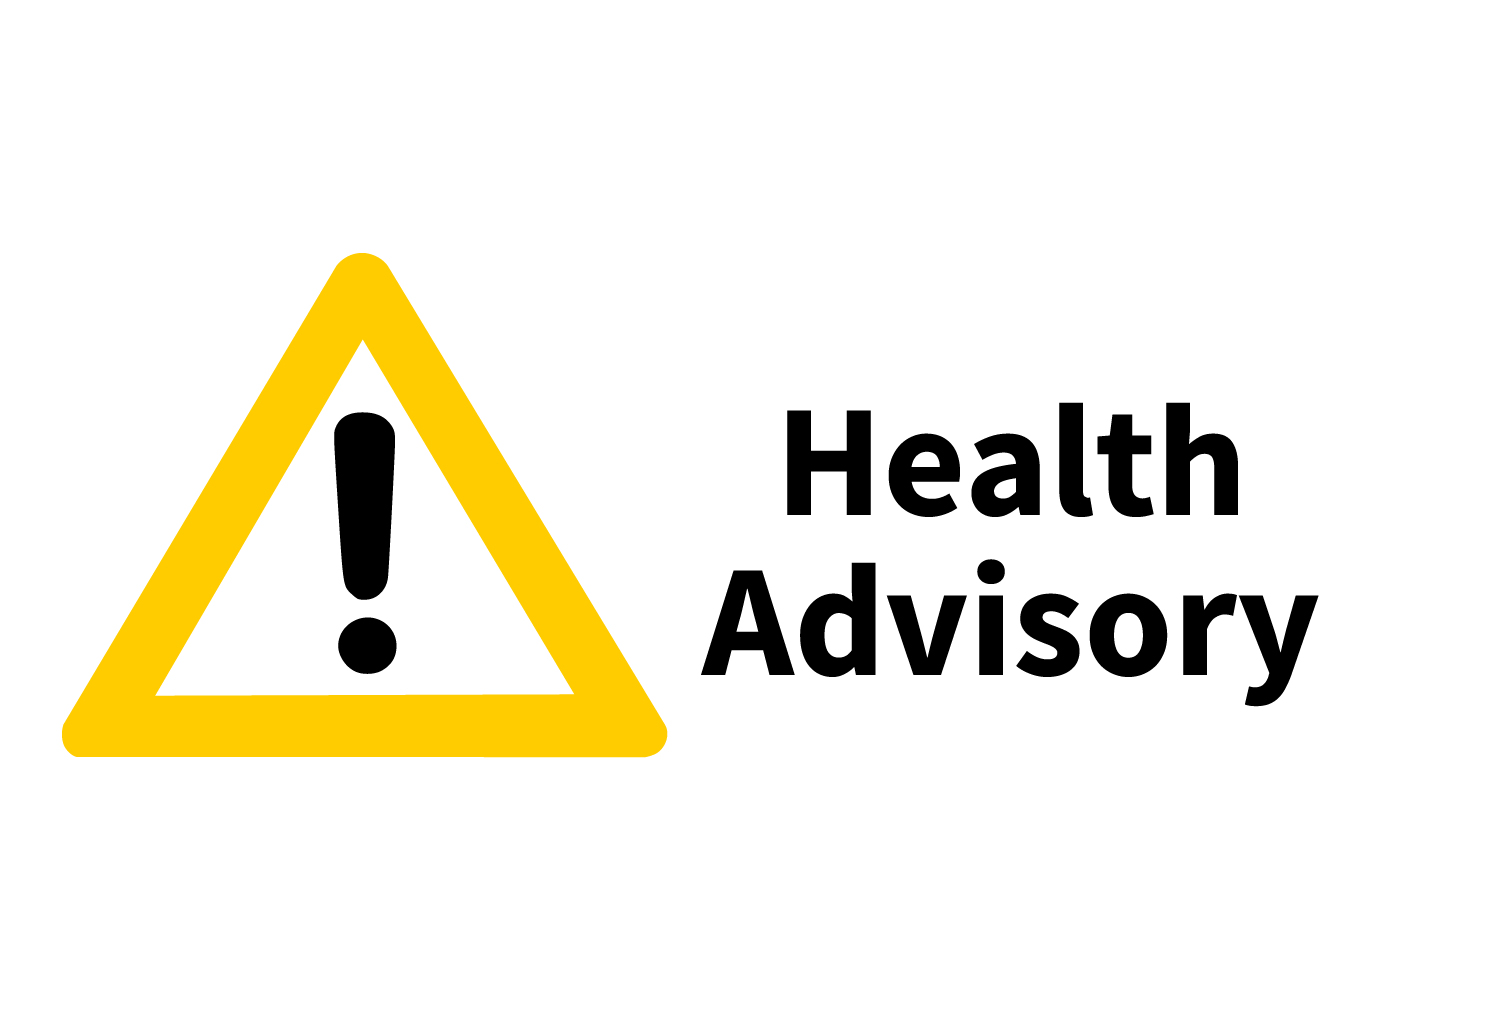 10/03/22 Health Advisory: Severe cases of monkeypox among people with immune compromise